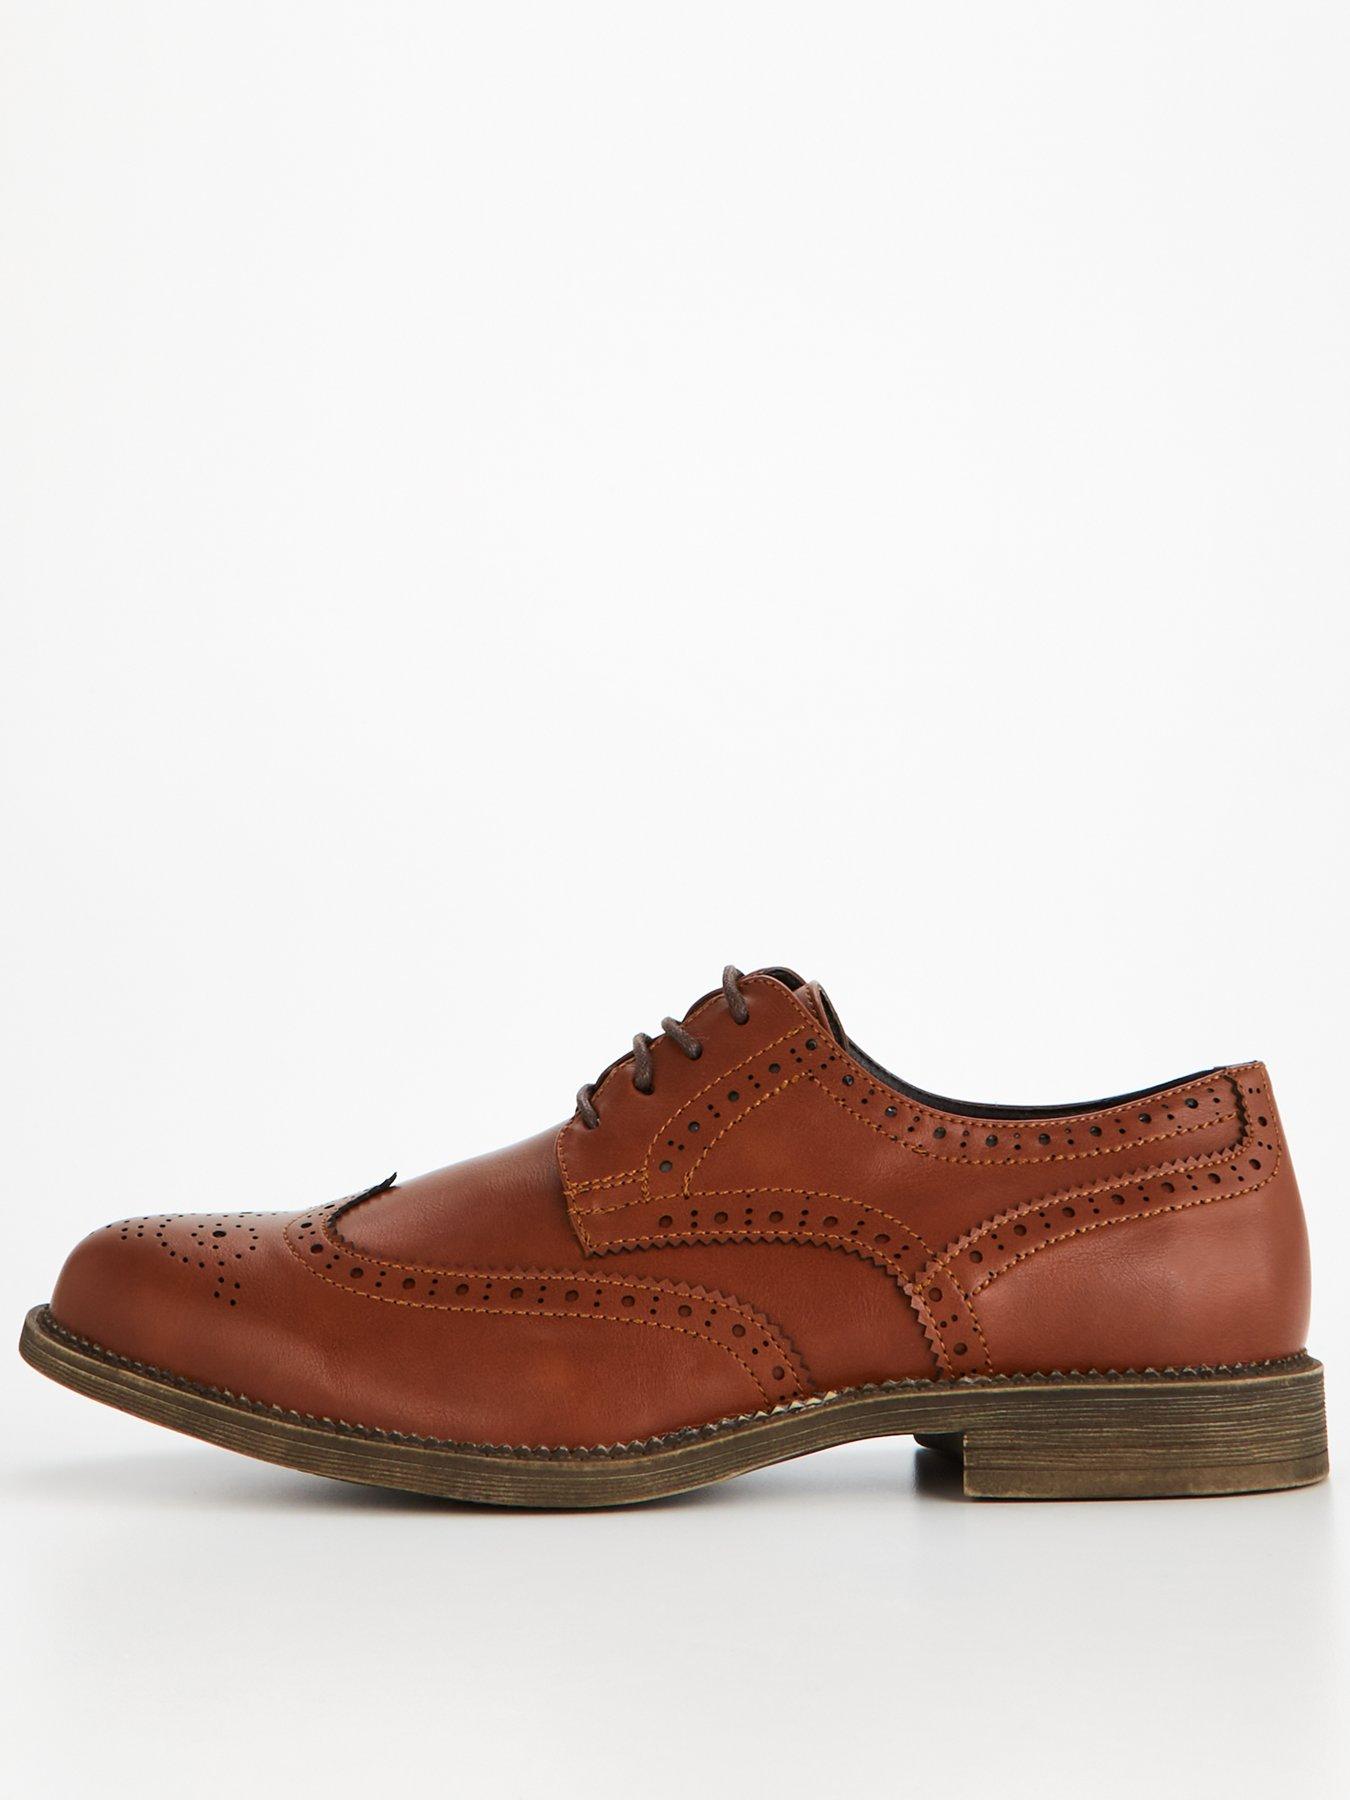 Everyday Mens Formal Lace Up Brogue Shoe - Standard | very.co.uk